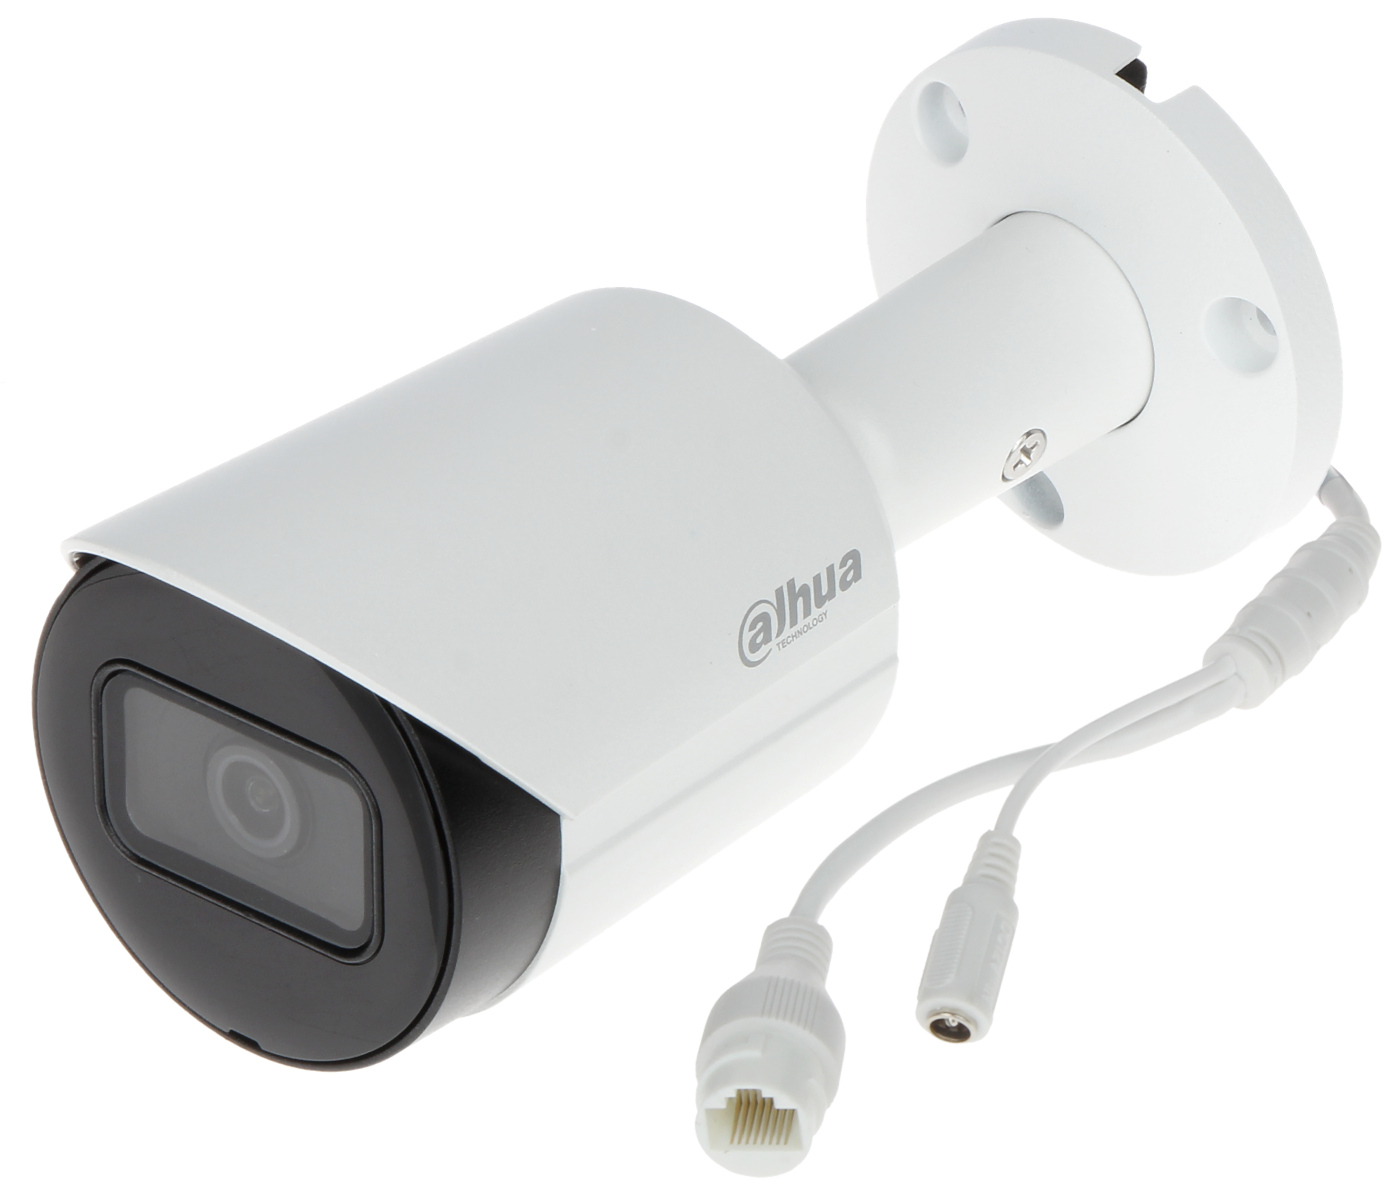 IP CAMERA IPC-HFW2431S-S-0280B-S2 - 4 Mpx 2.8 mm DAHUA - IP Cameras with  Fixed-Focal Lens and Ifra-Red Illumina... - Delta